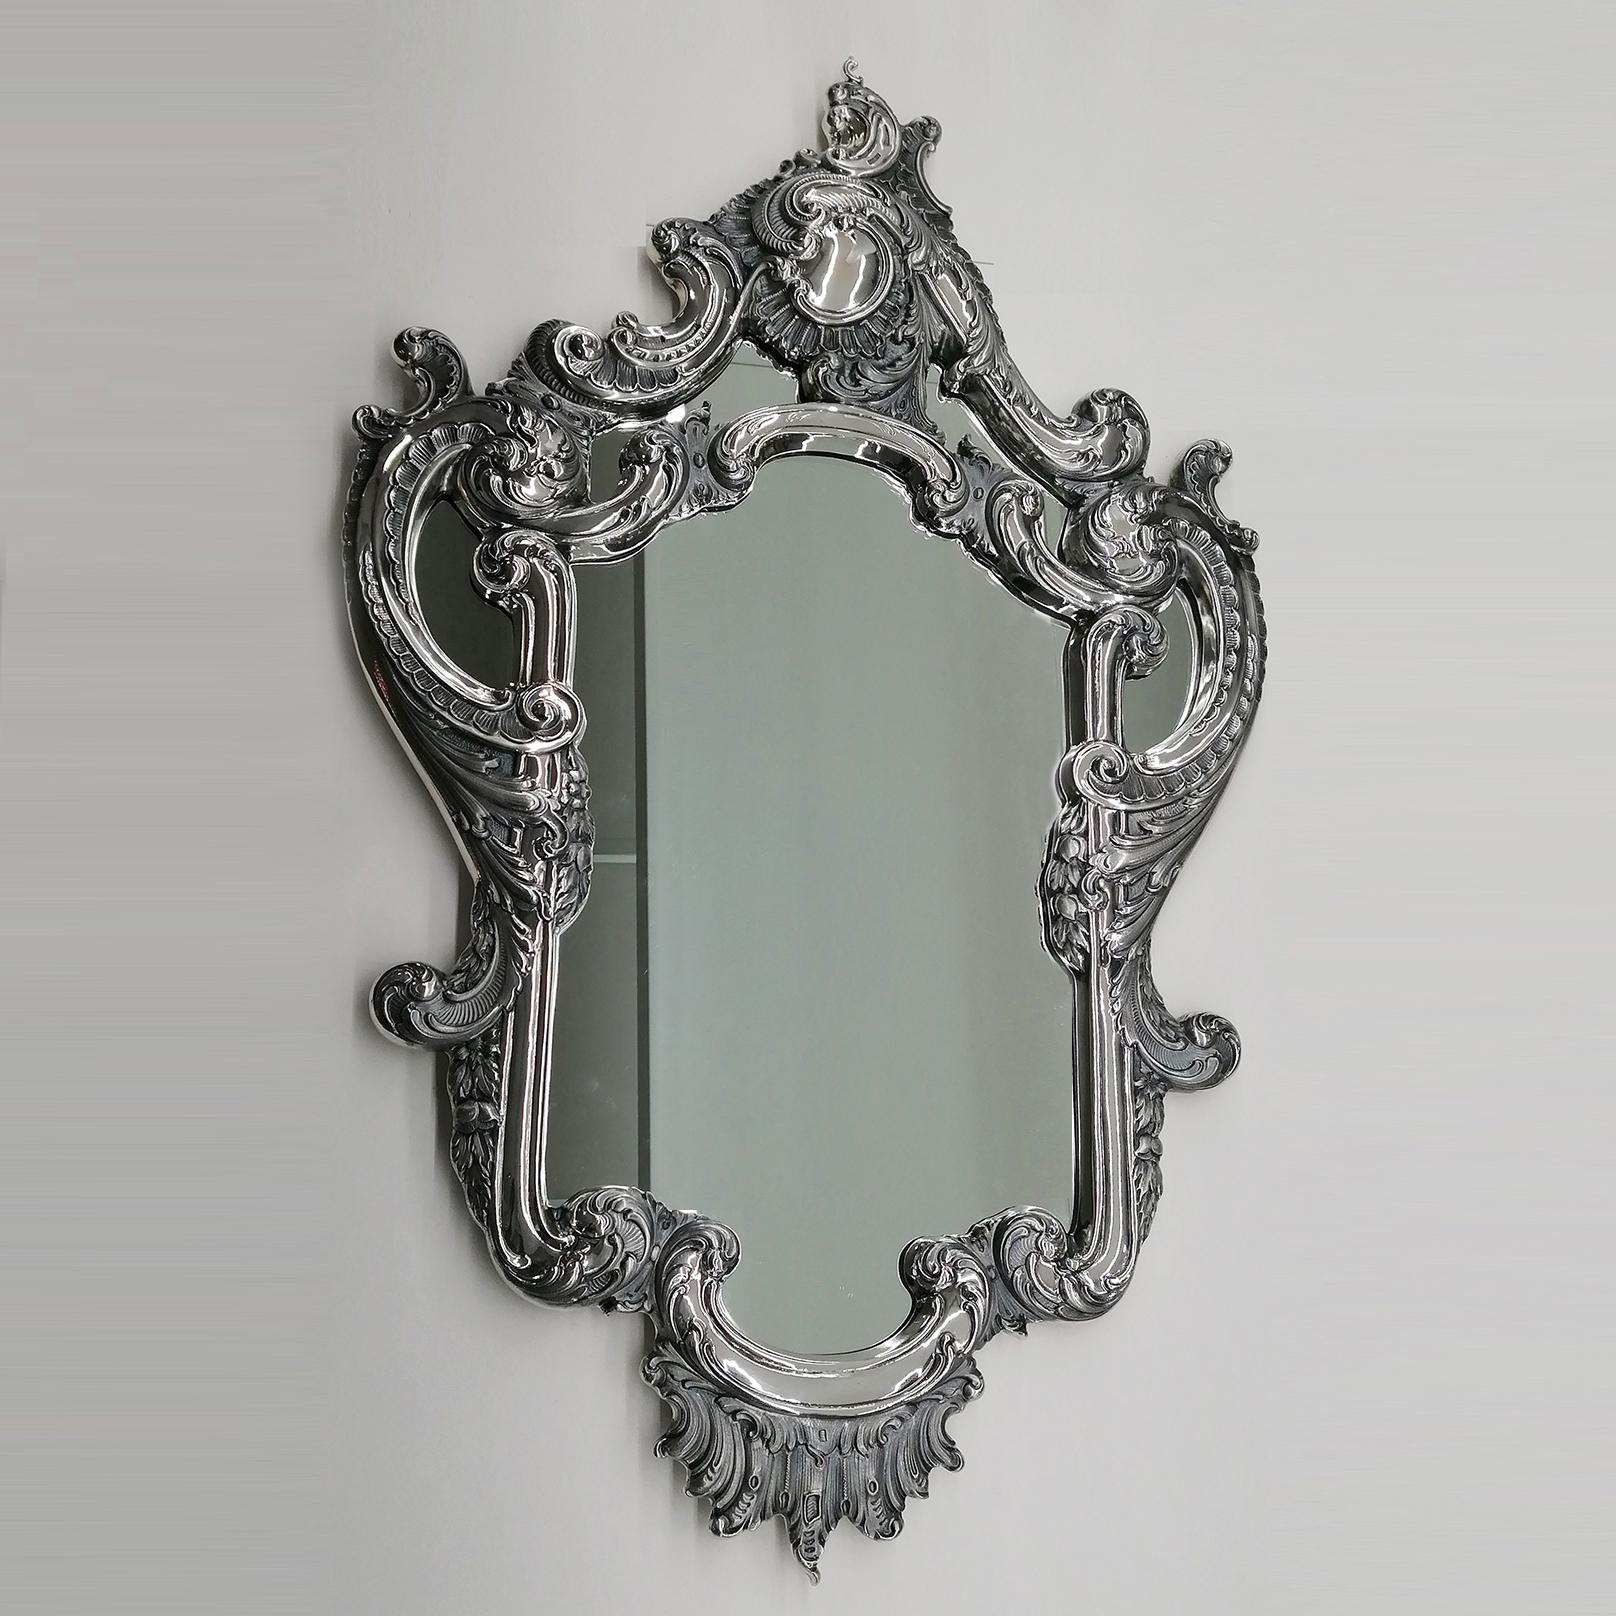 Gorgeous mirror in solid 800 silver made in Milan - Italy in the mid-1950s.
The mirror was masterfully embossed and chiselled with scrolls, shells and flowers, typical of the Baroque style.
The finish is two-tone glossy and with burnished parts to